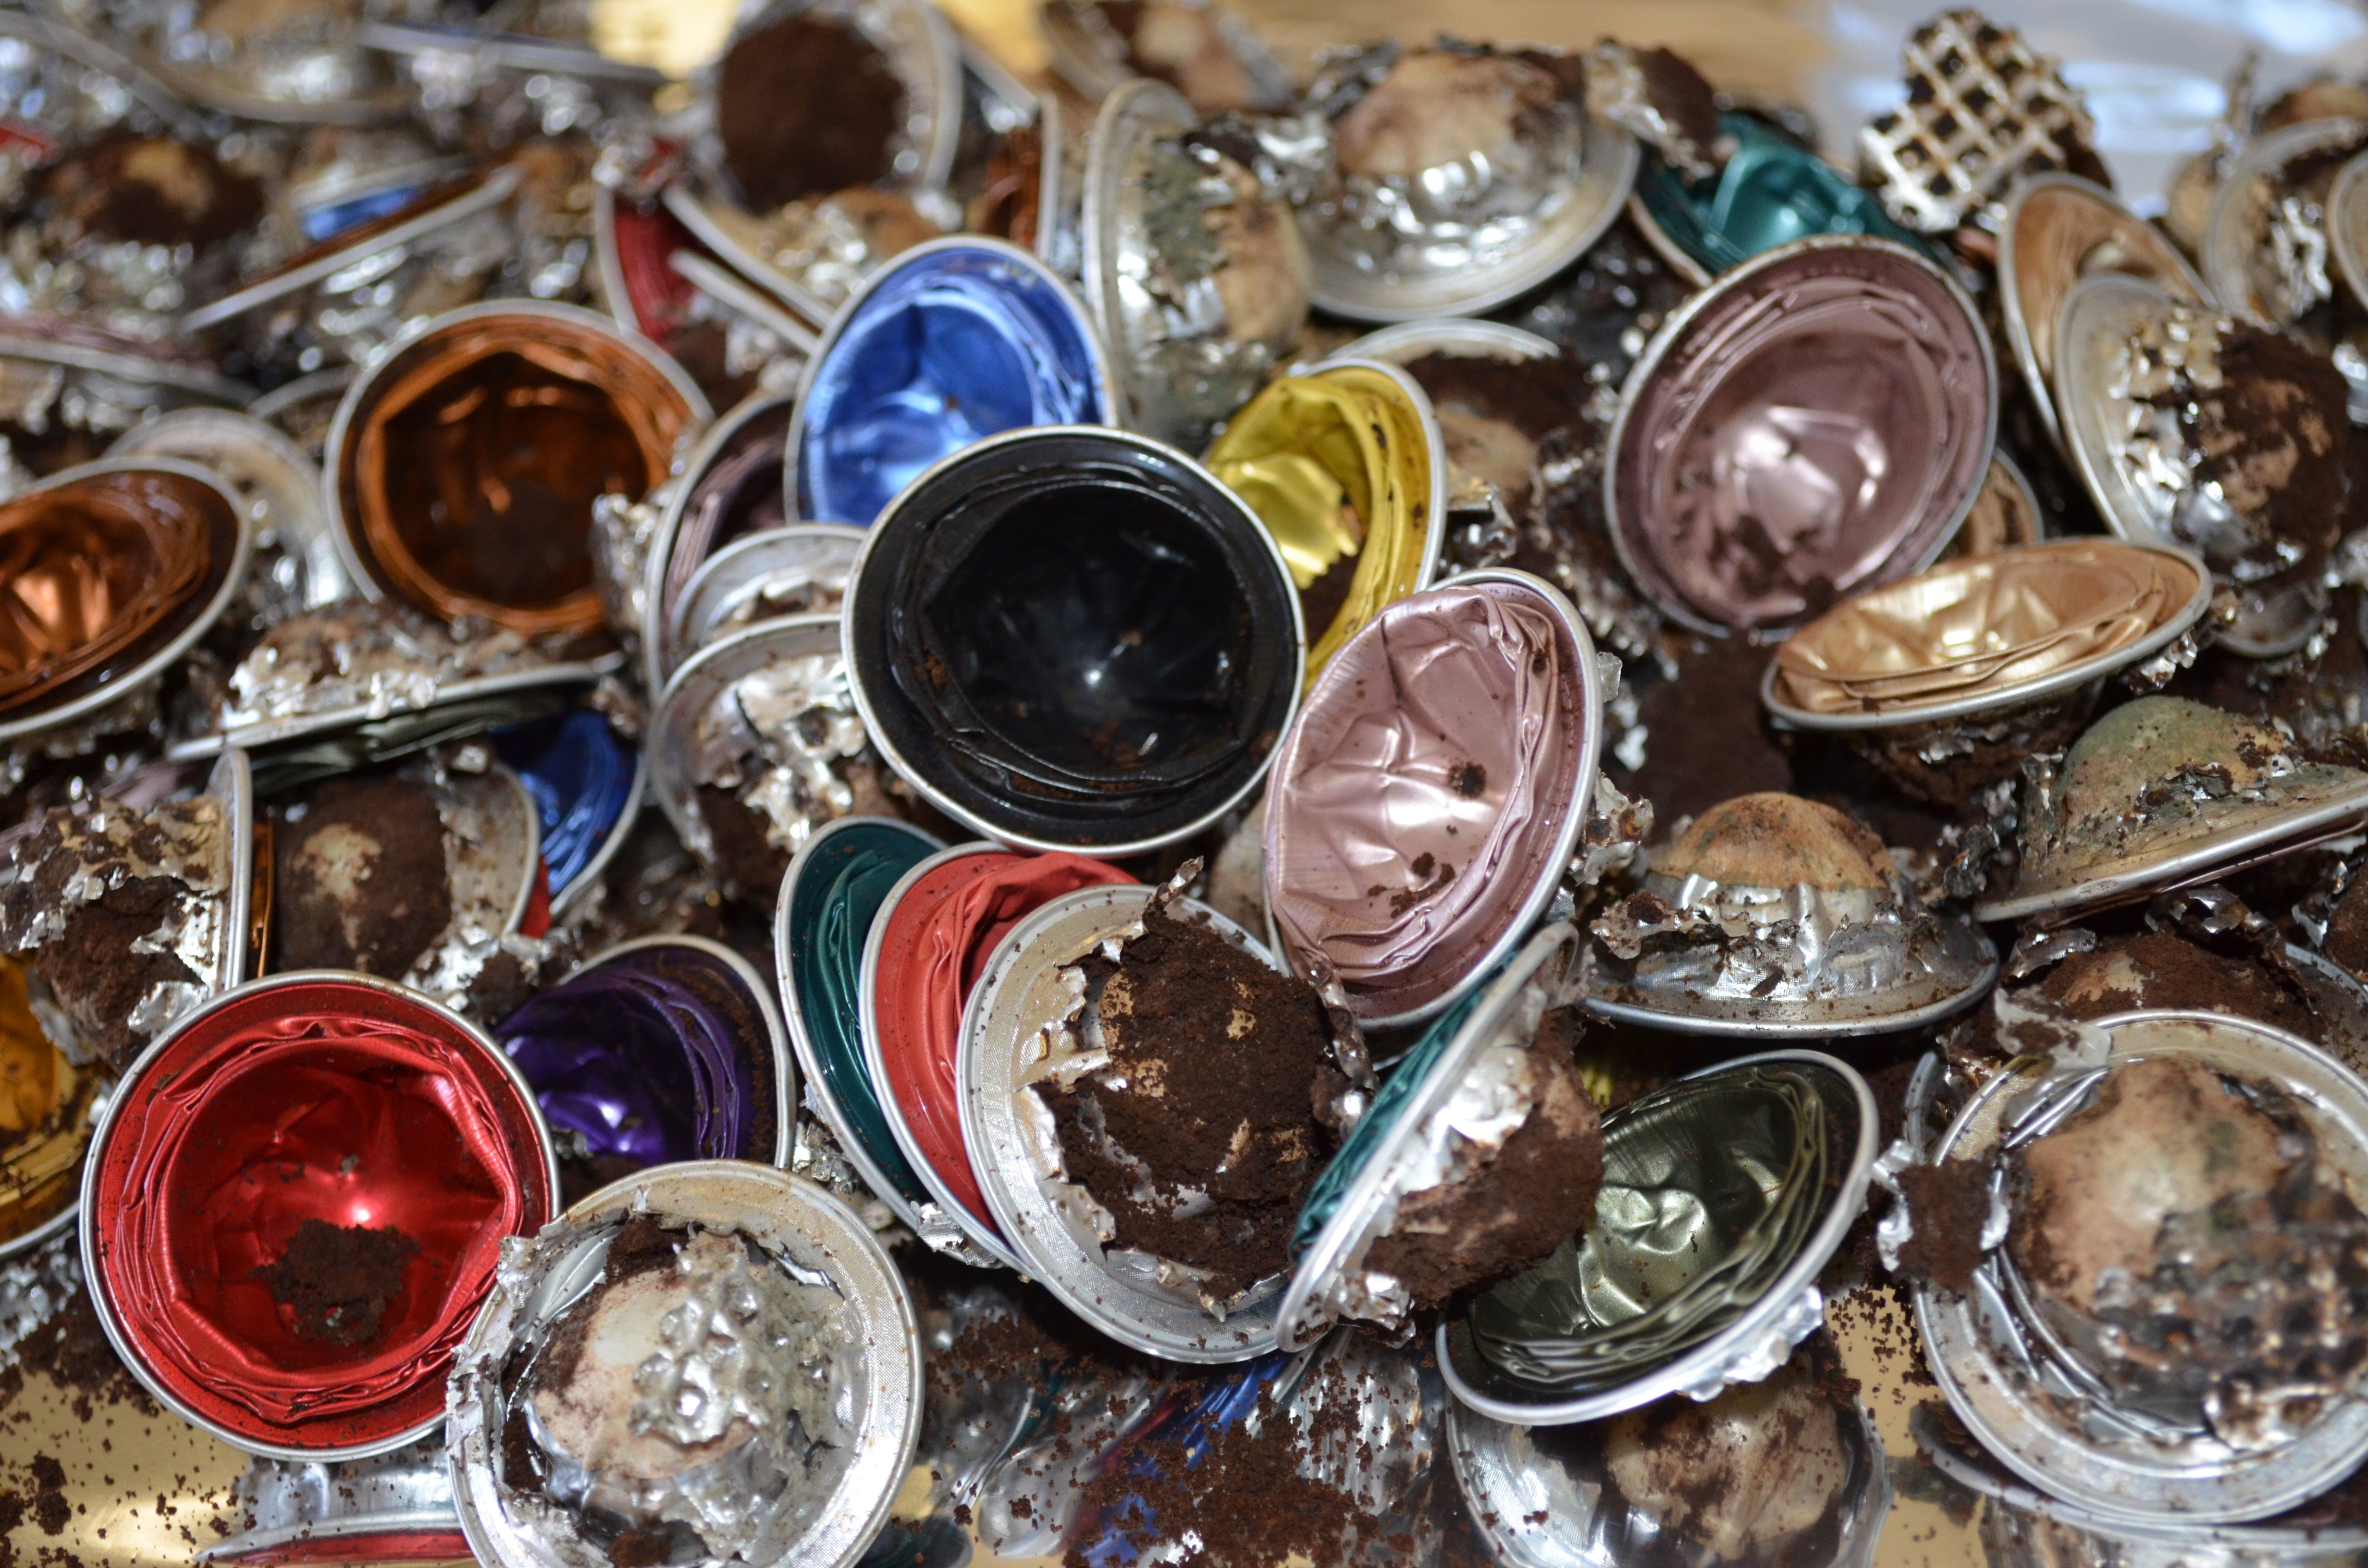 10 plastic products that are ruining the planet - coffee pods